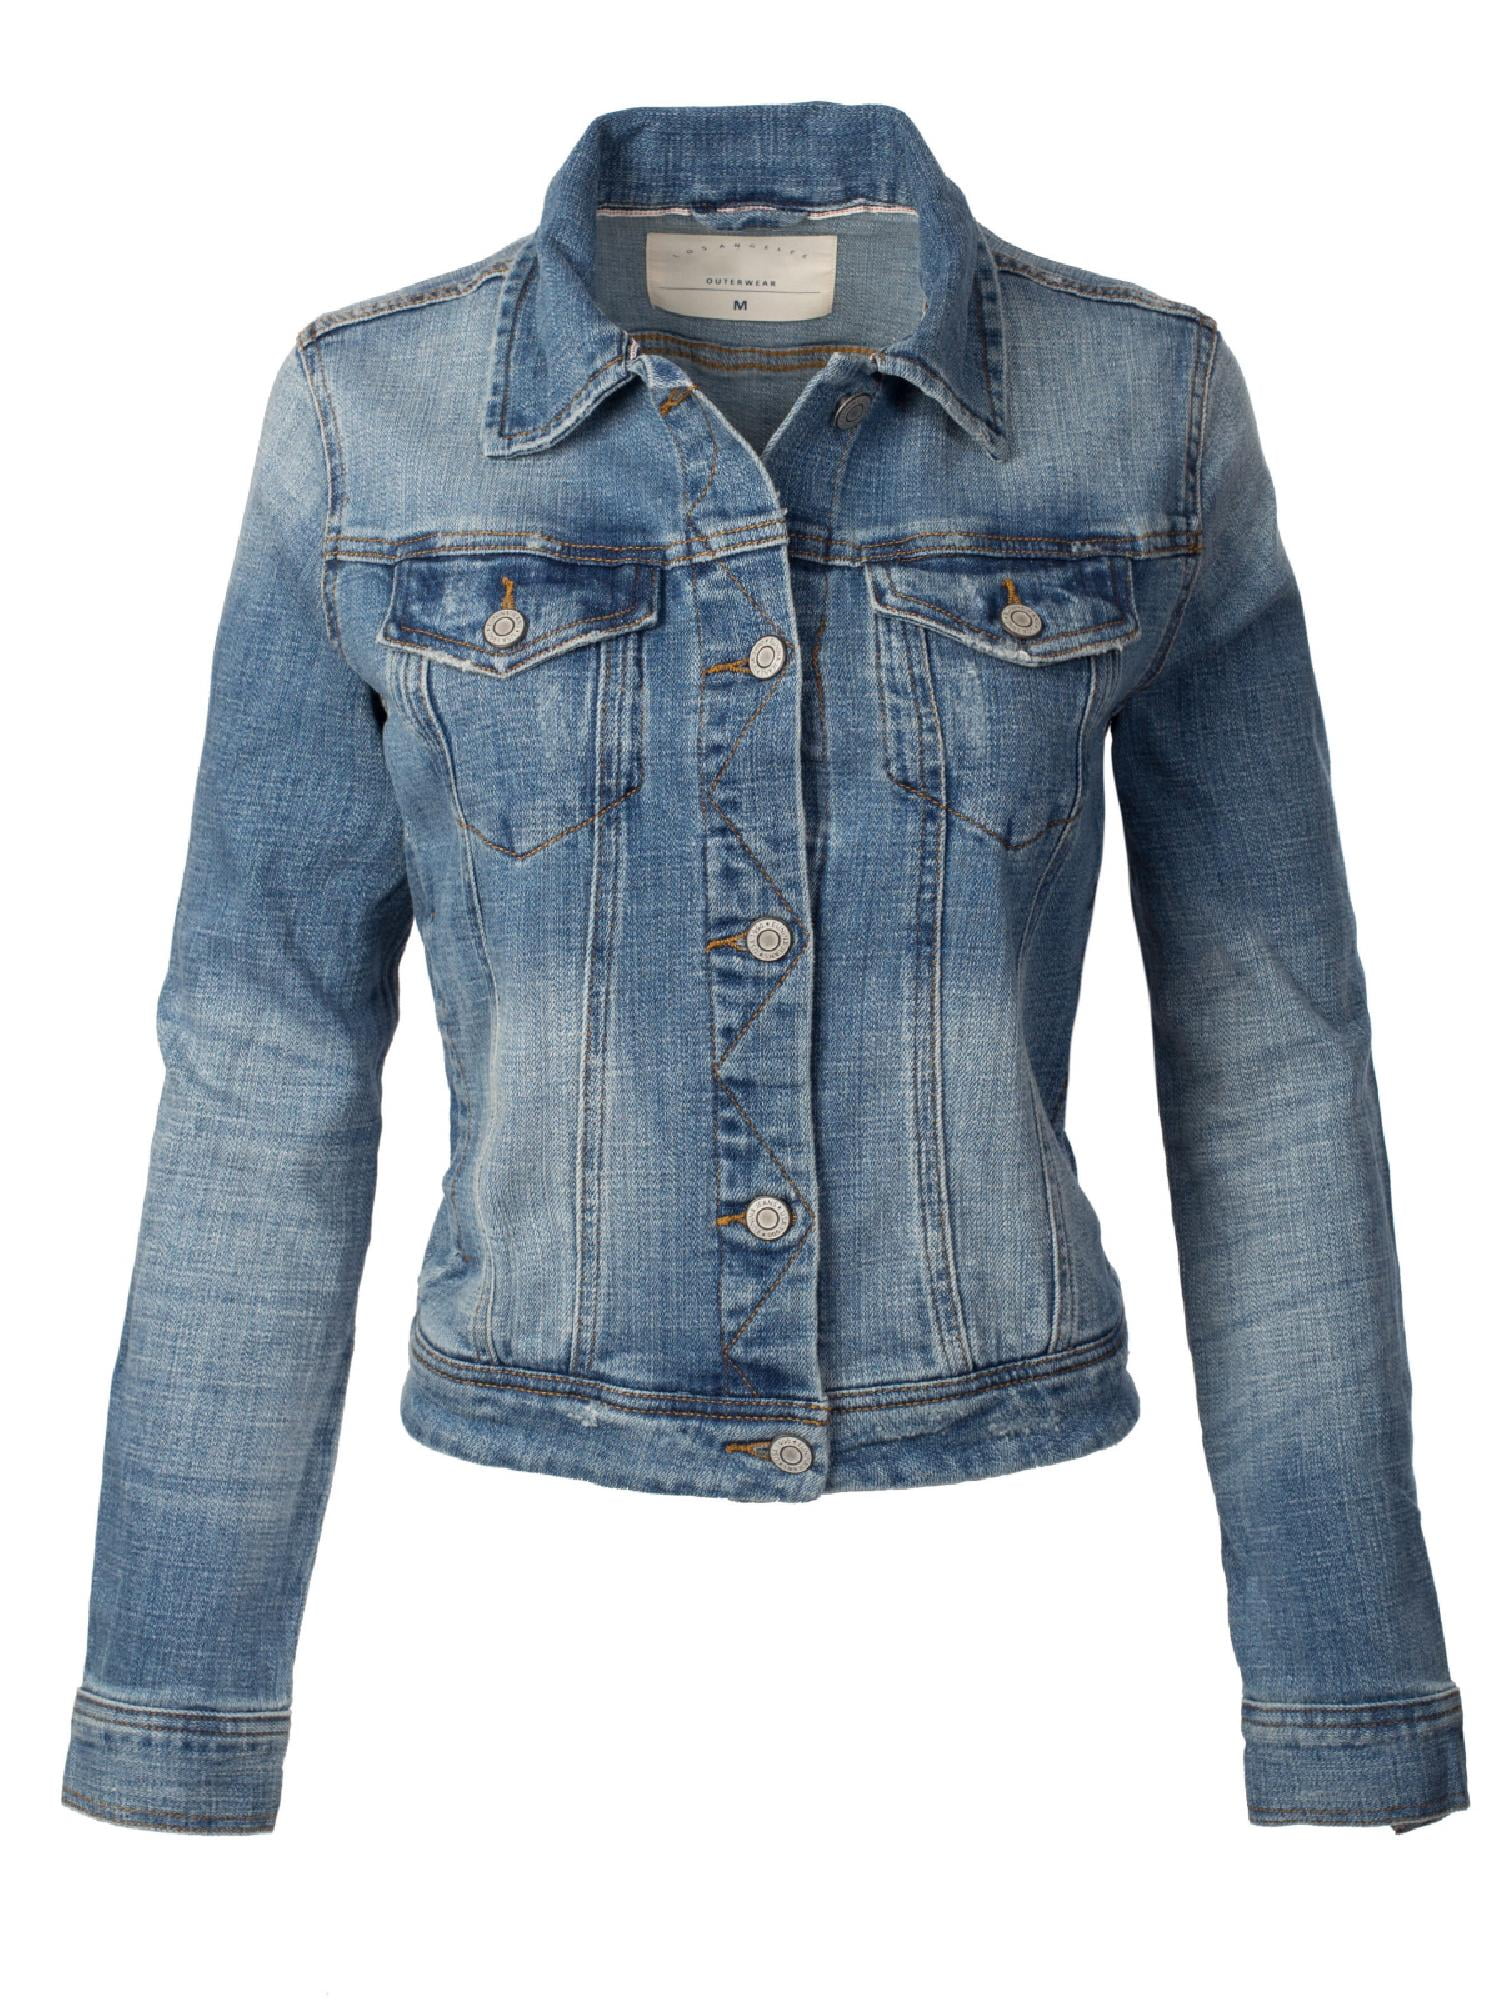 Made by Olivia Women's Classic Casual Vintage Denim Jean Jacket ...